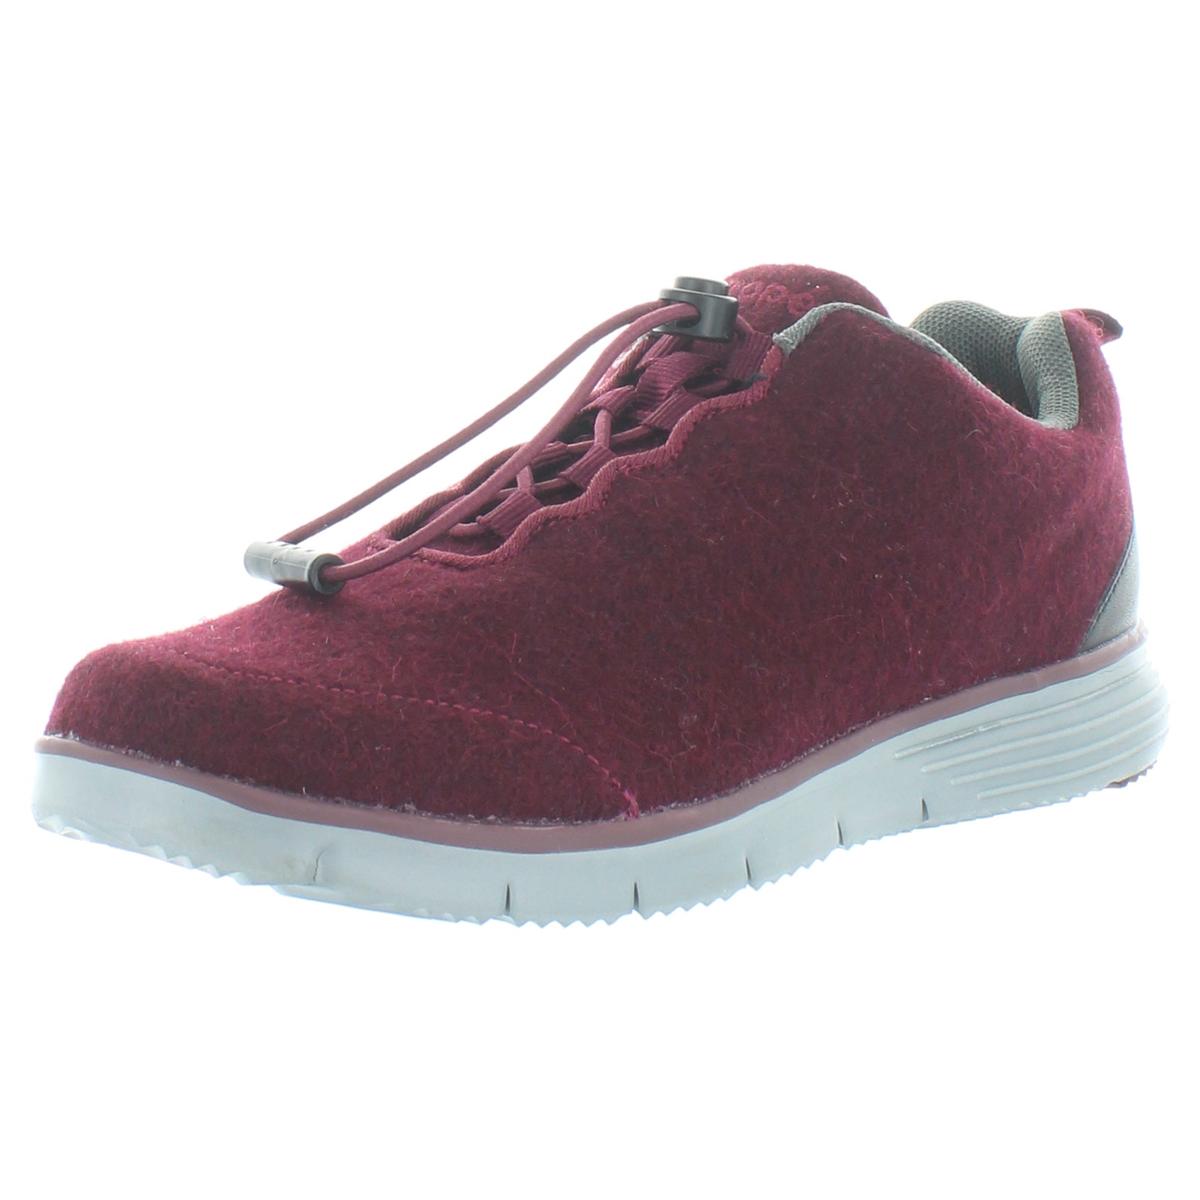 Propet Womens Travel Fit Prestige Trainers Lightweight Sneakers Shoes BHFO 0970